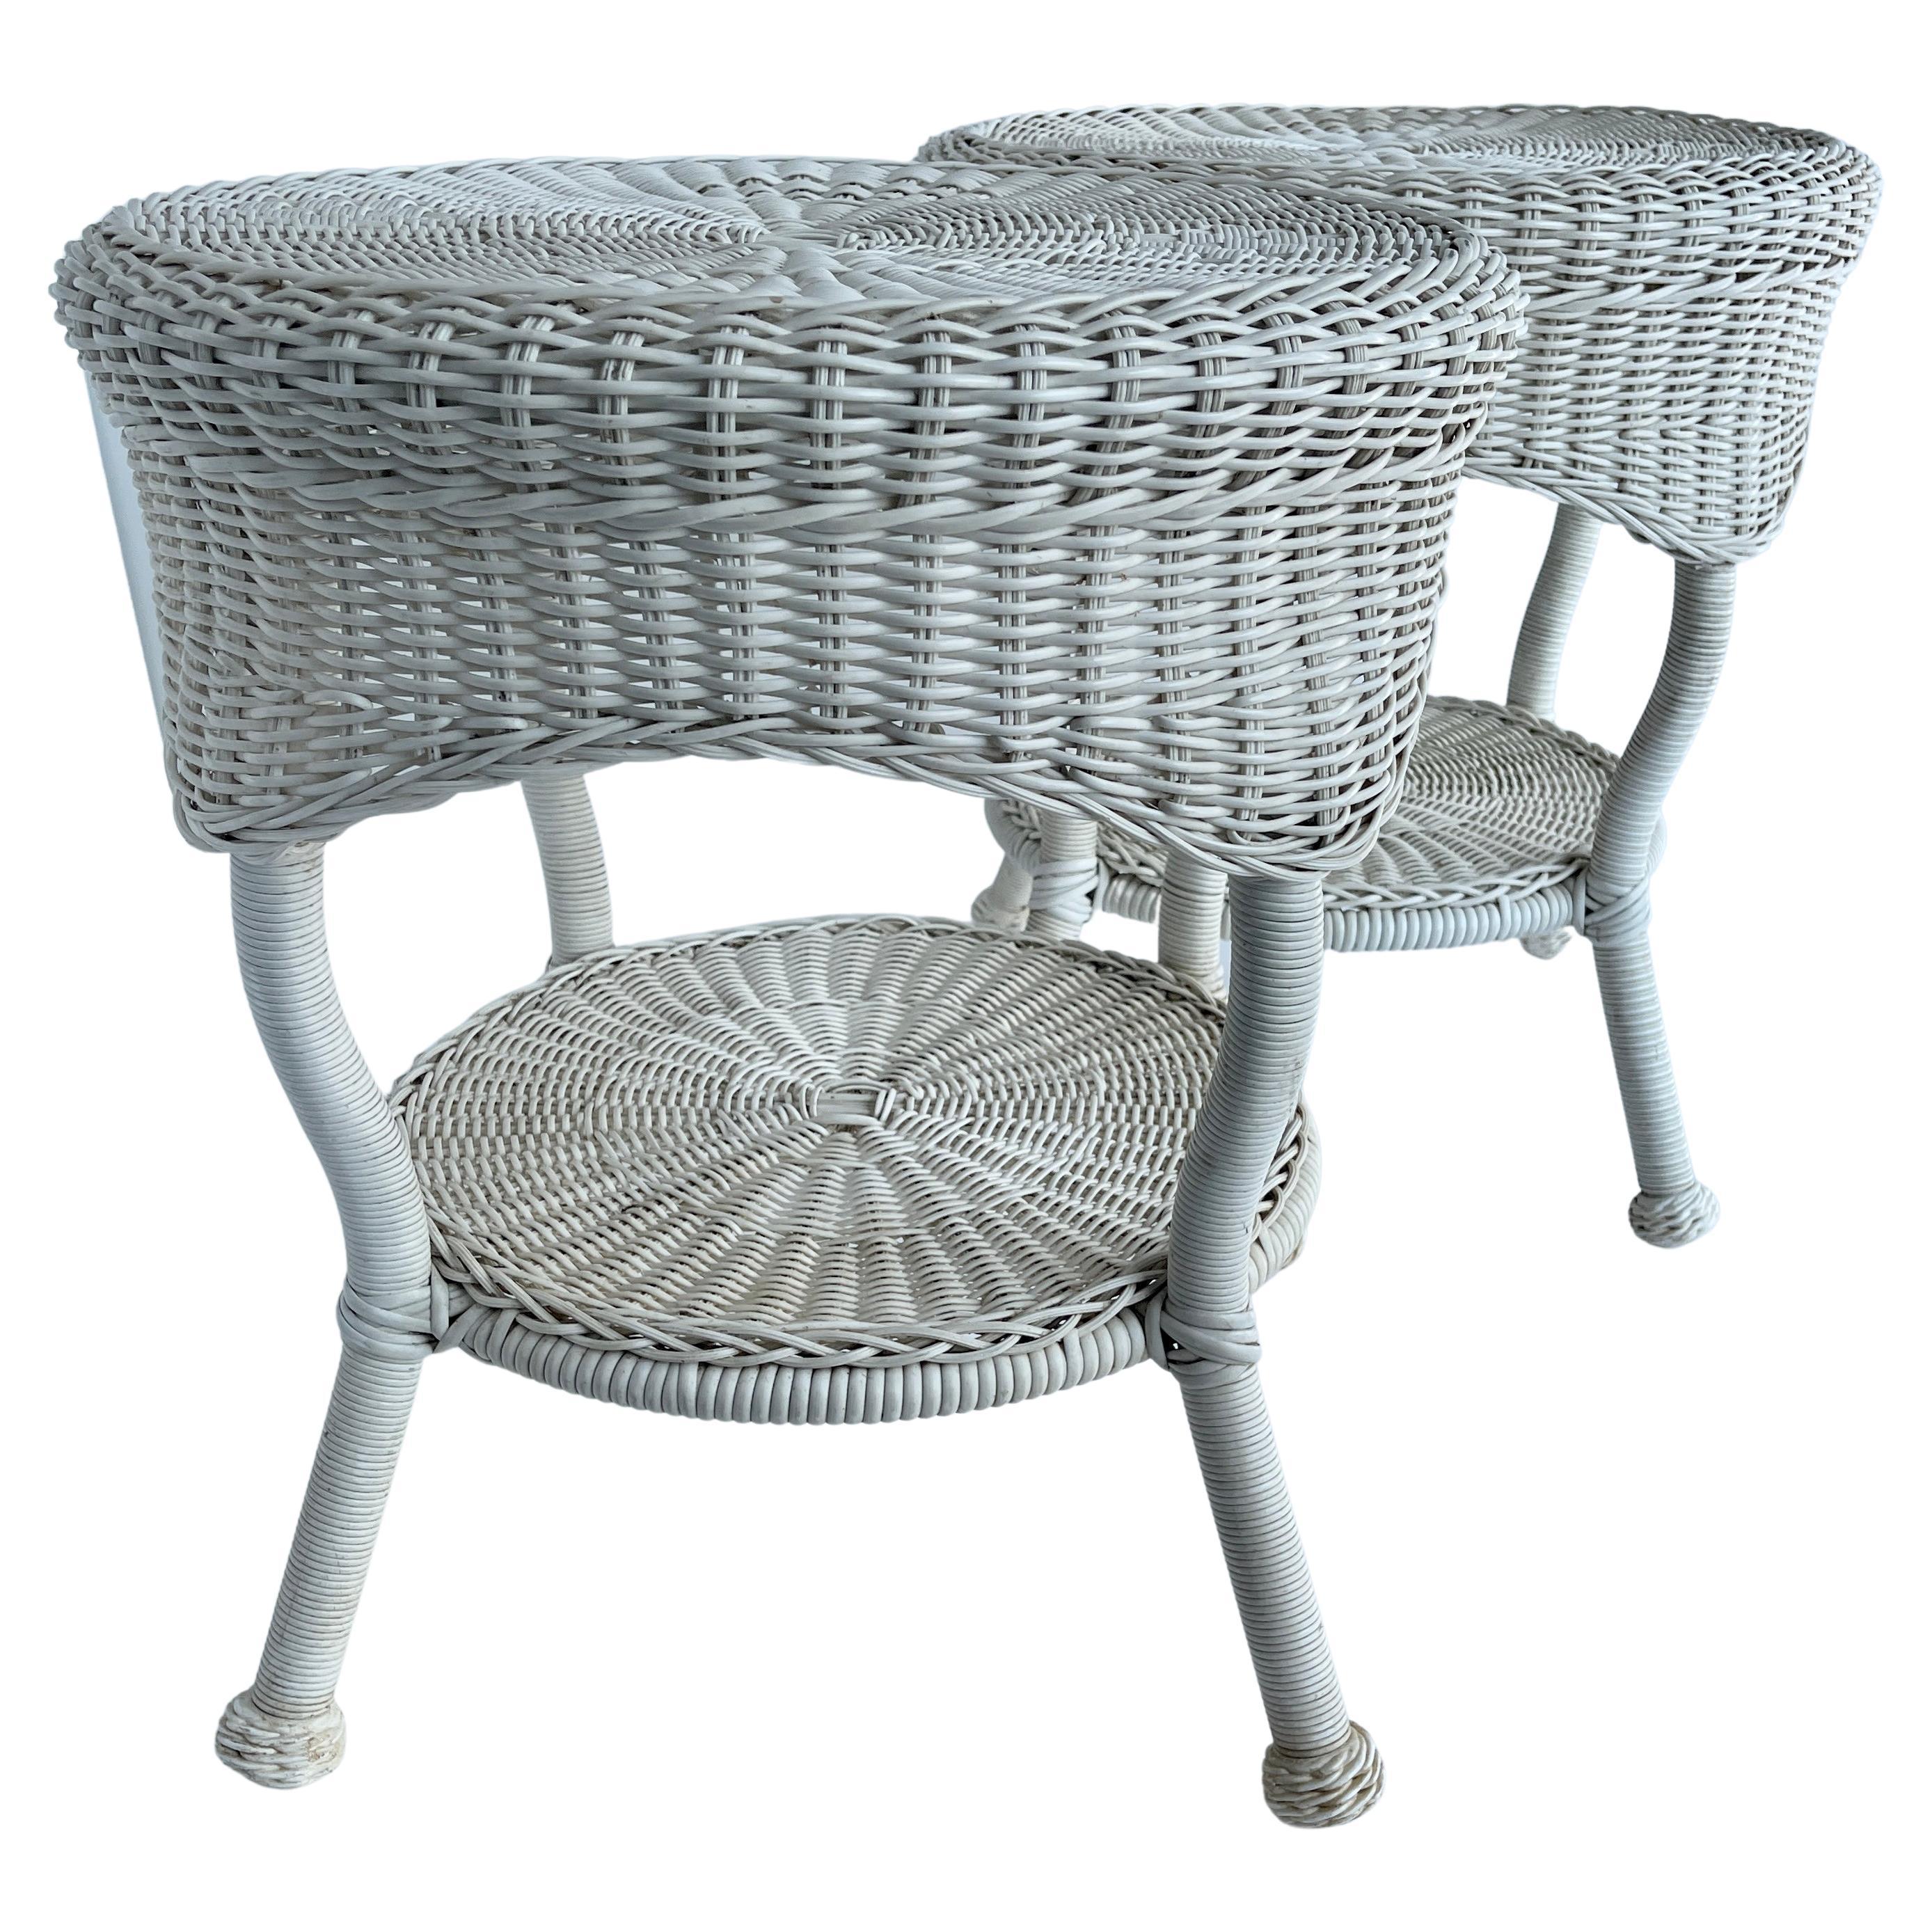 Pair of White Faux Wicker Side Tables